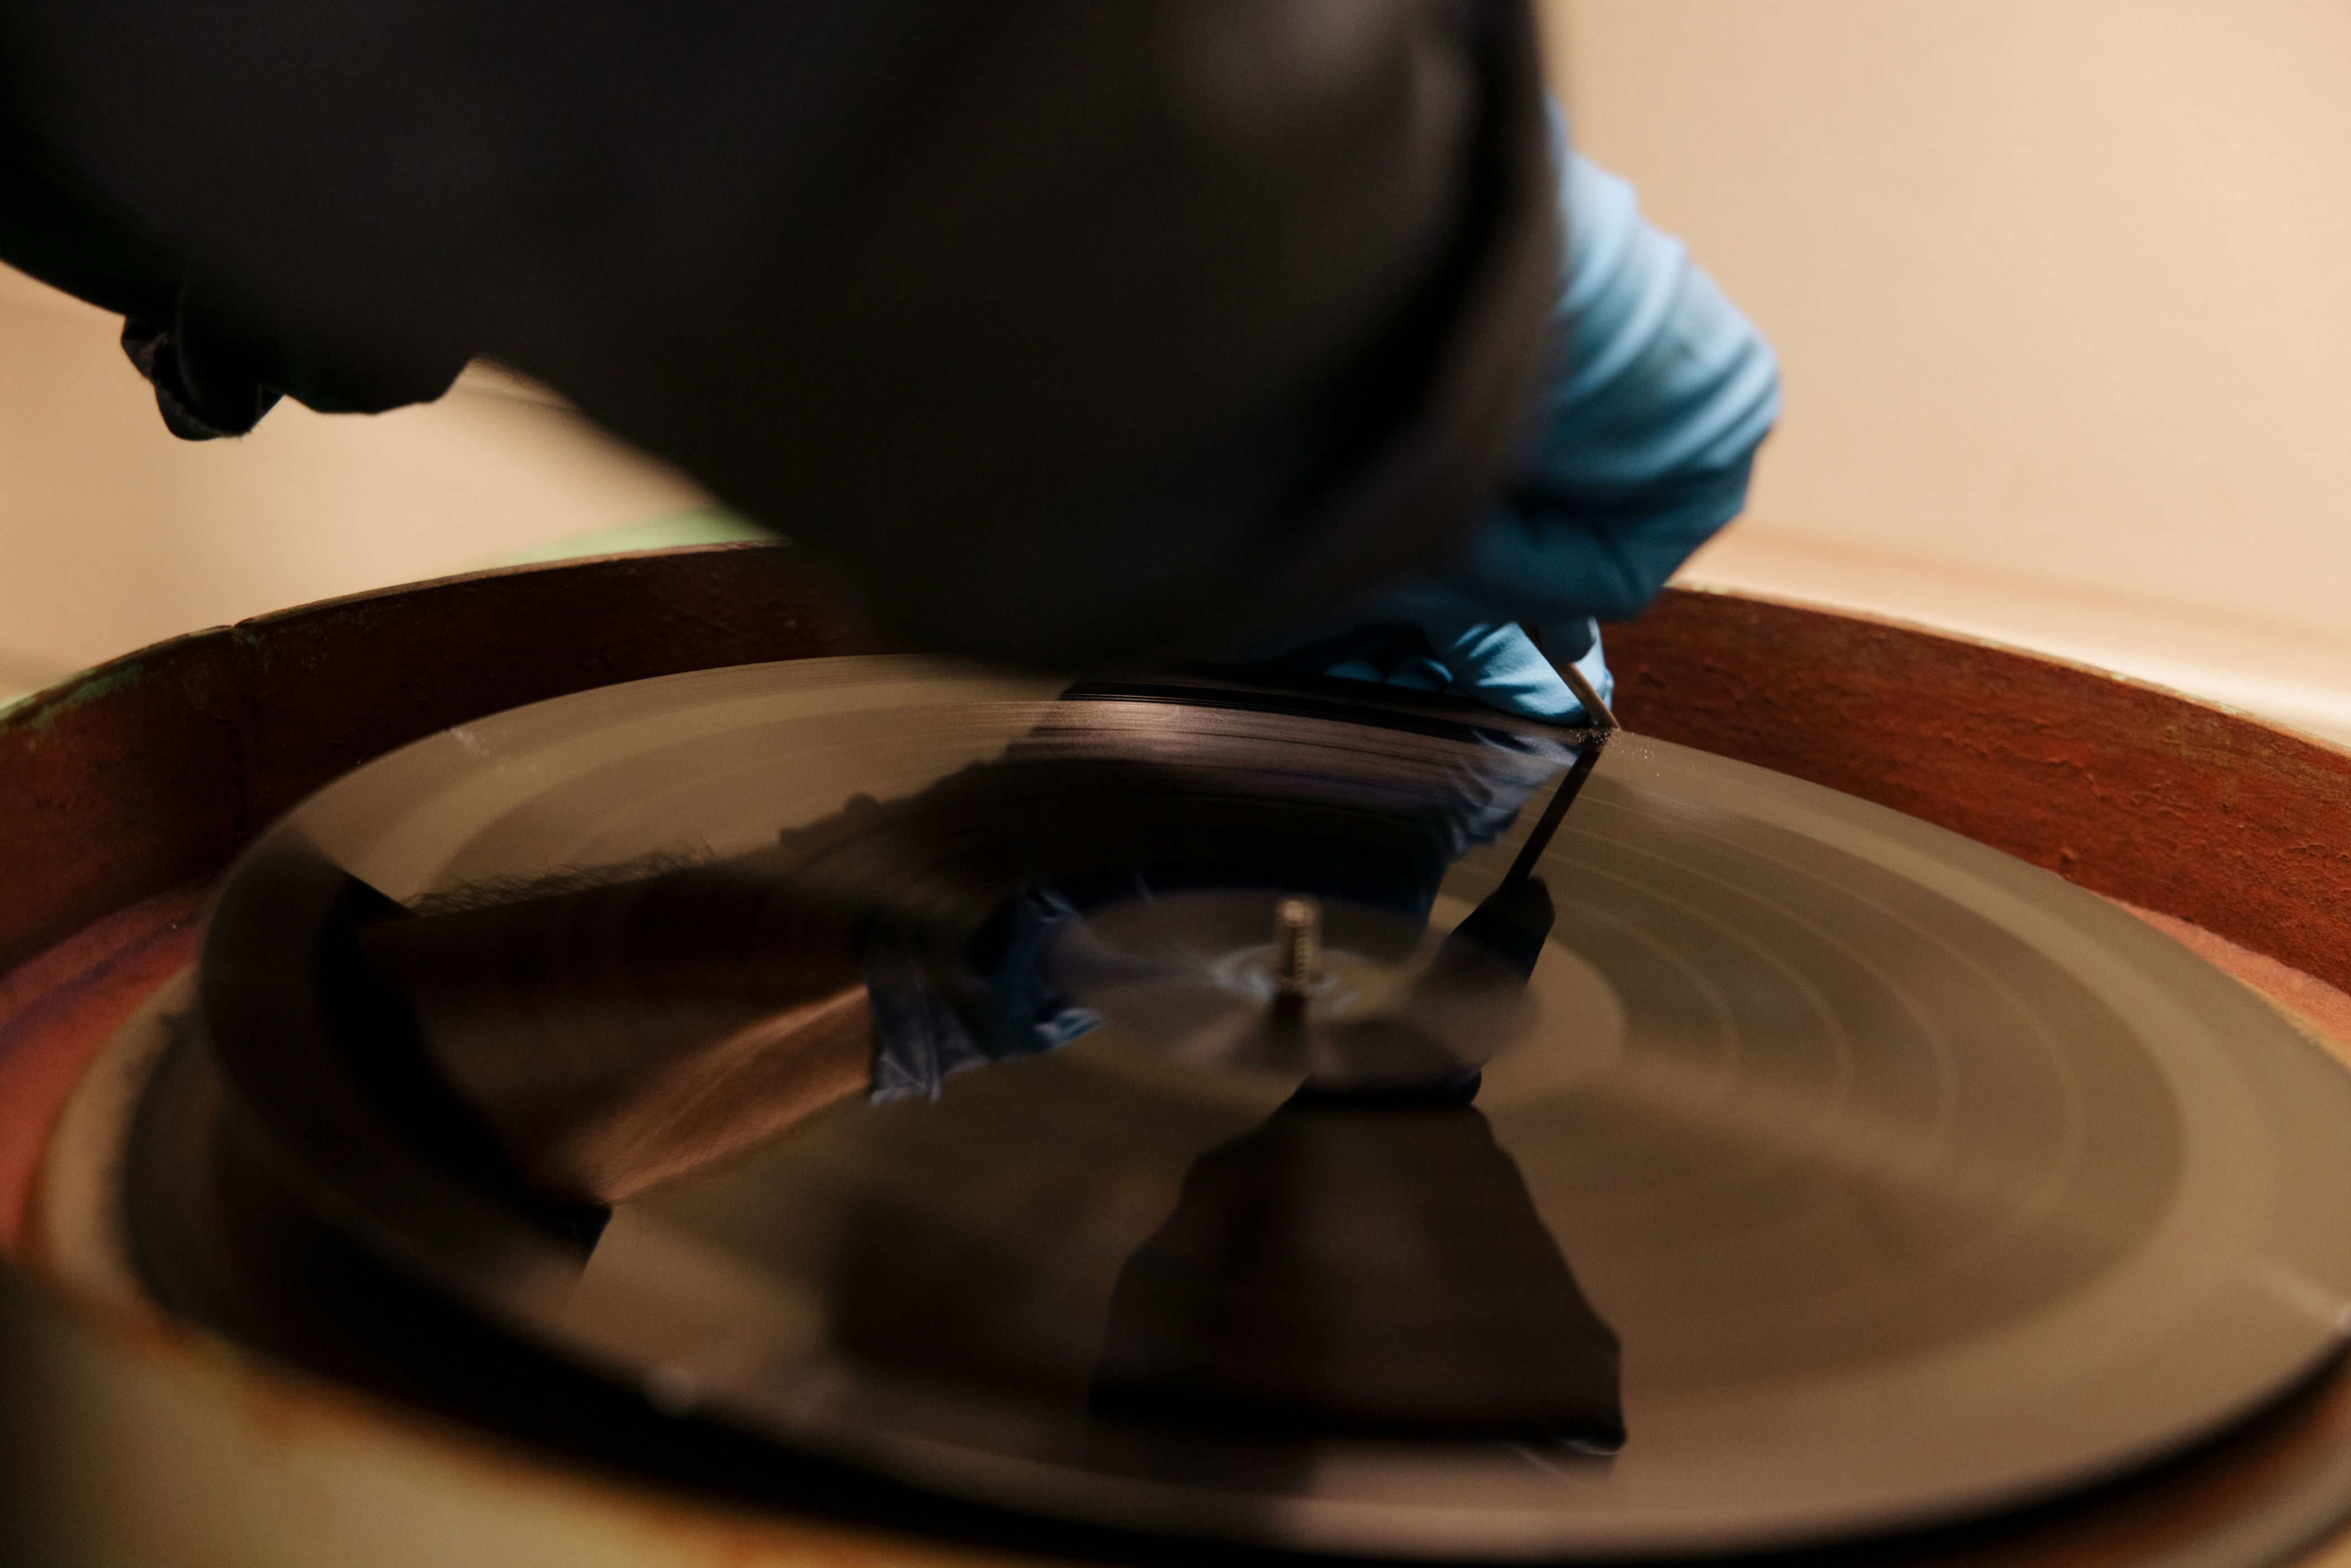 vinyl records are all the rage. here’s how they’re made.